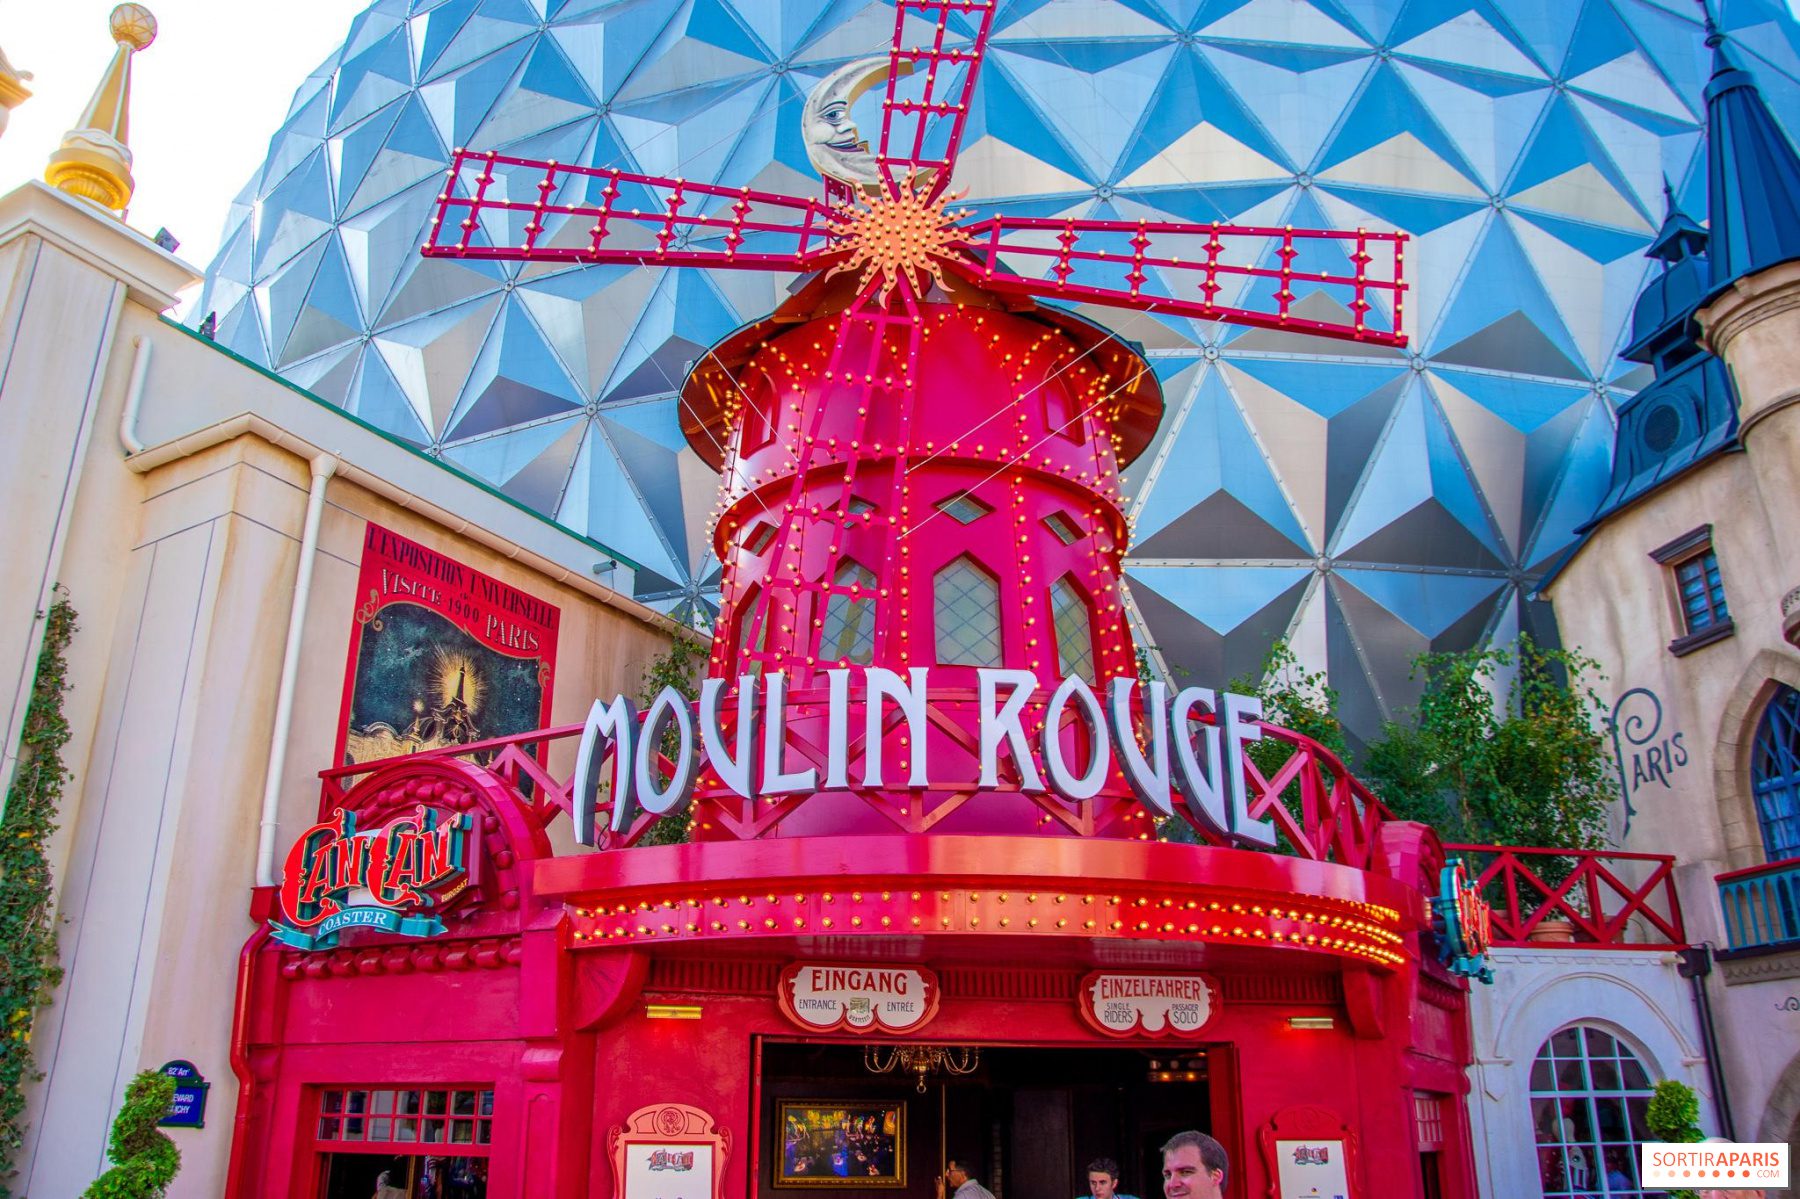 The entrance to a Moulin Rouge attraction with a windmill on top